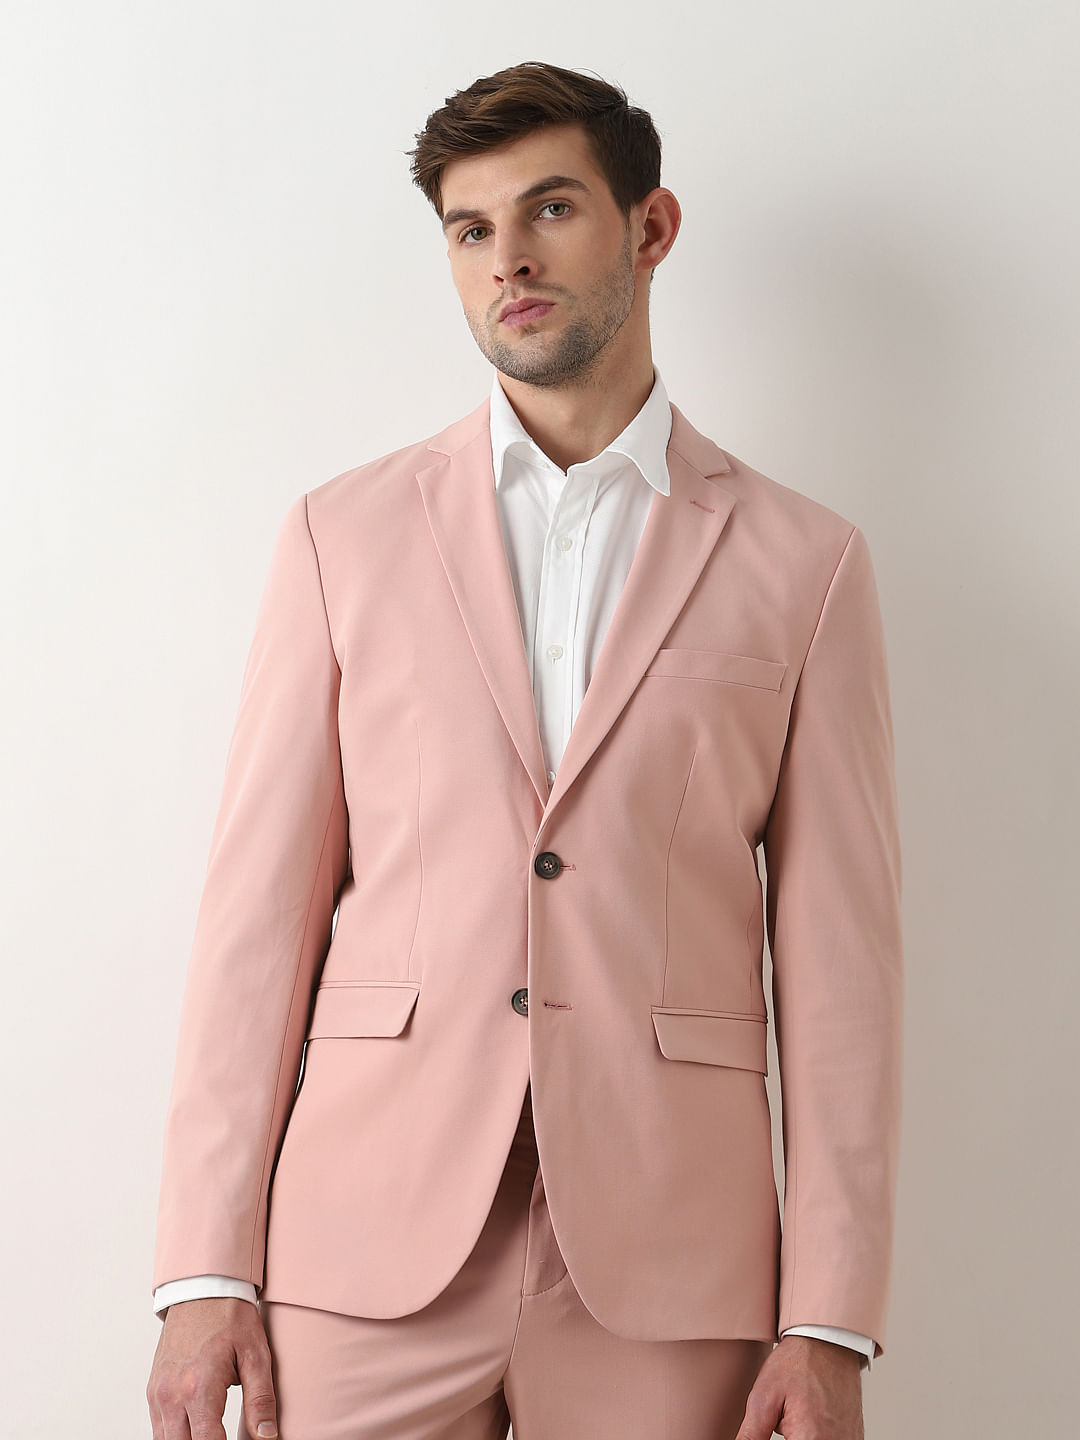 Men's Suits & Tailoring Outlet - Reiss USA